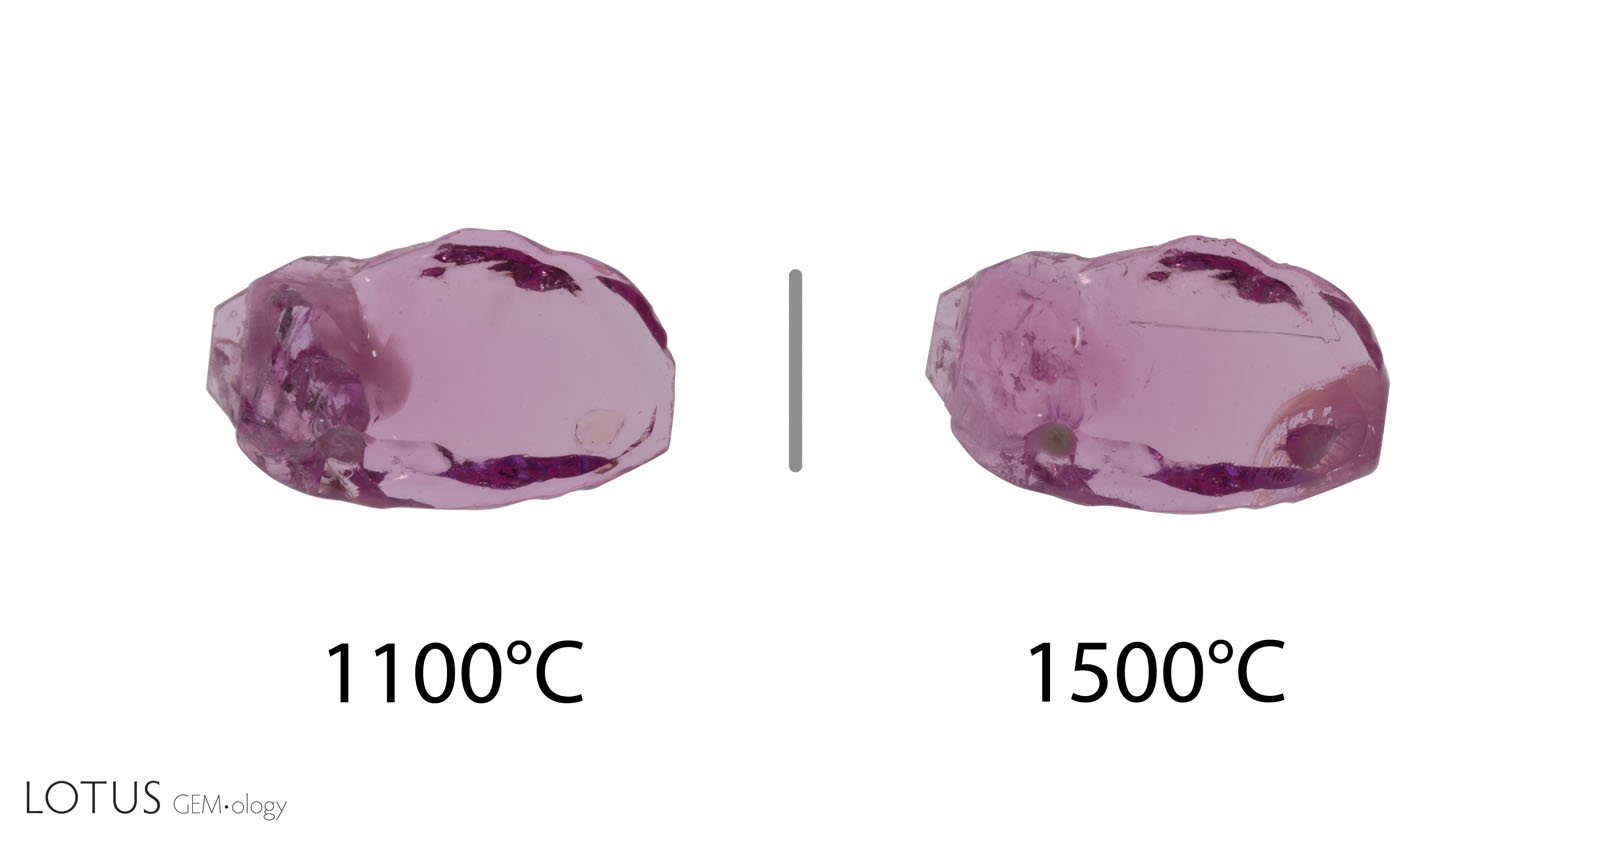 Figure 3. When heated to 1500°C, a cluster of inclusions on the left side of sample 10 became less obvious. On the right side, the alteration of a sphene crystal created clarity issues. Photos by Sora-at Manorotkul.